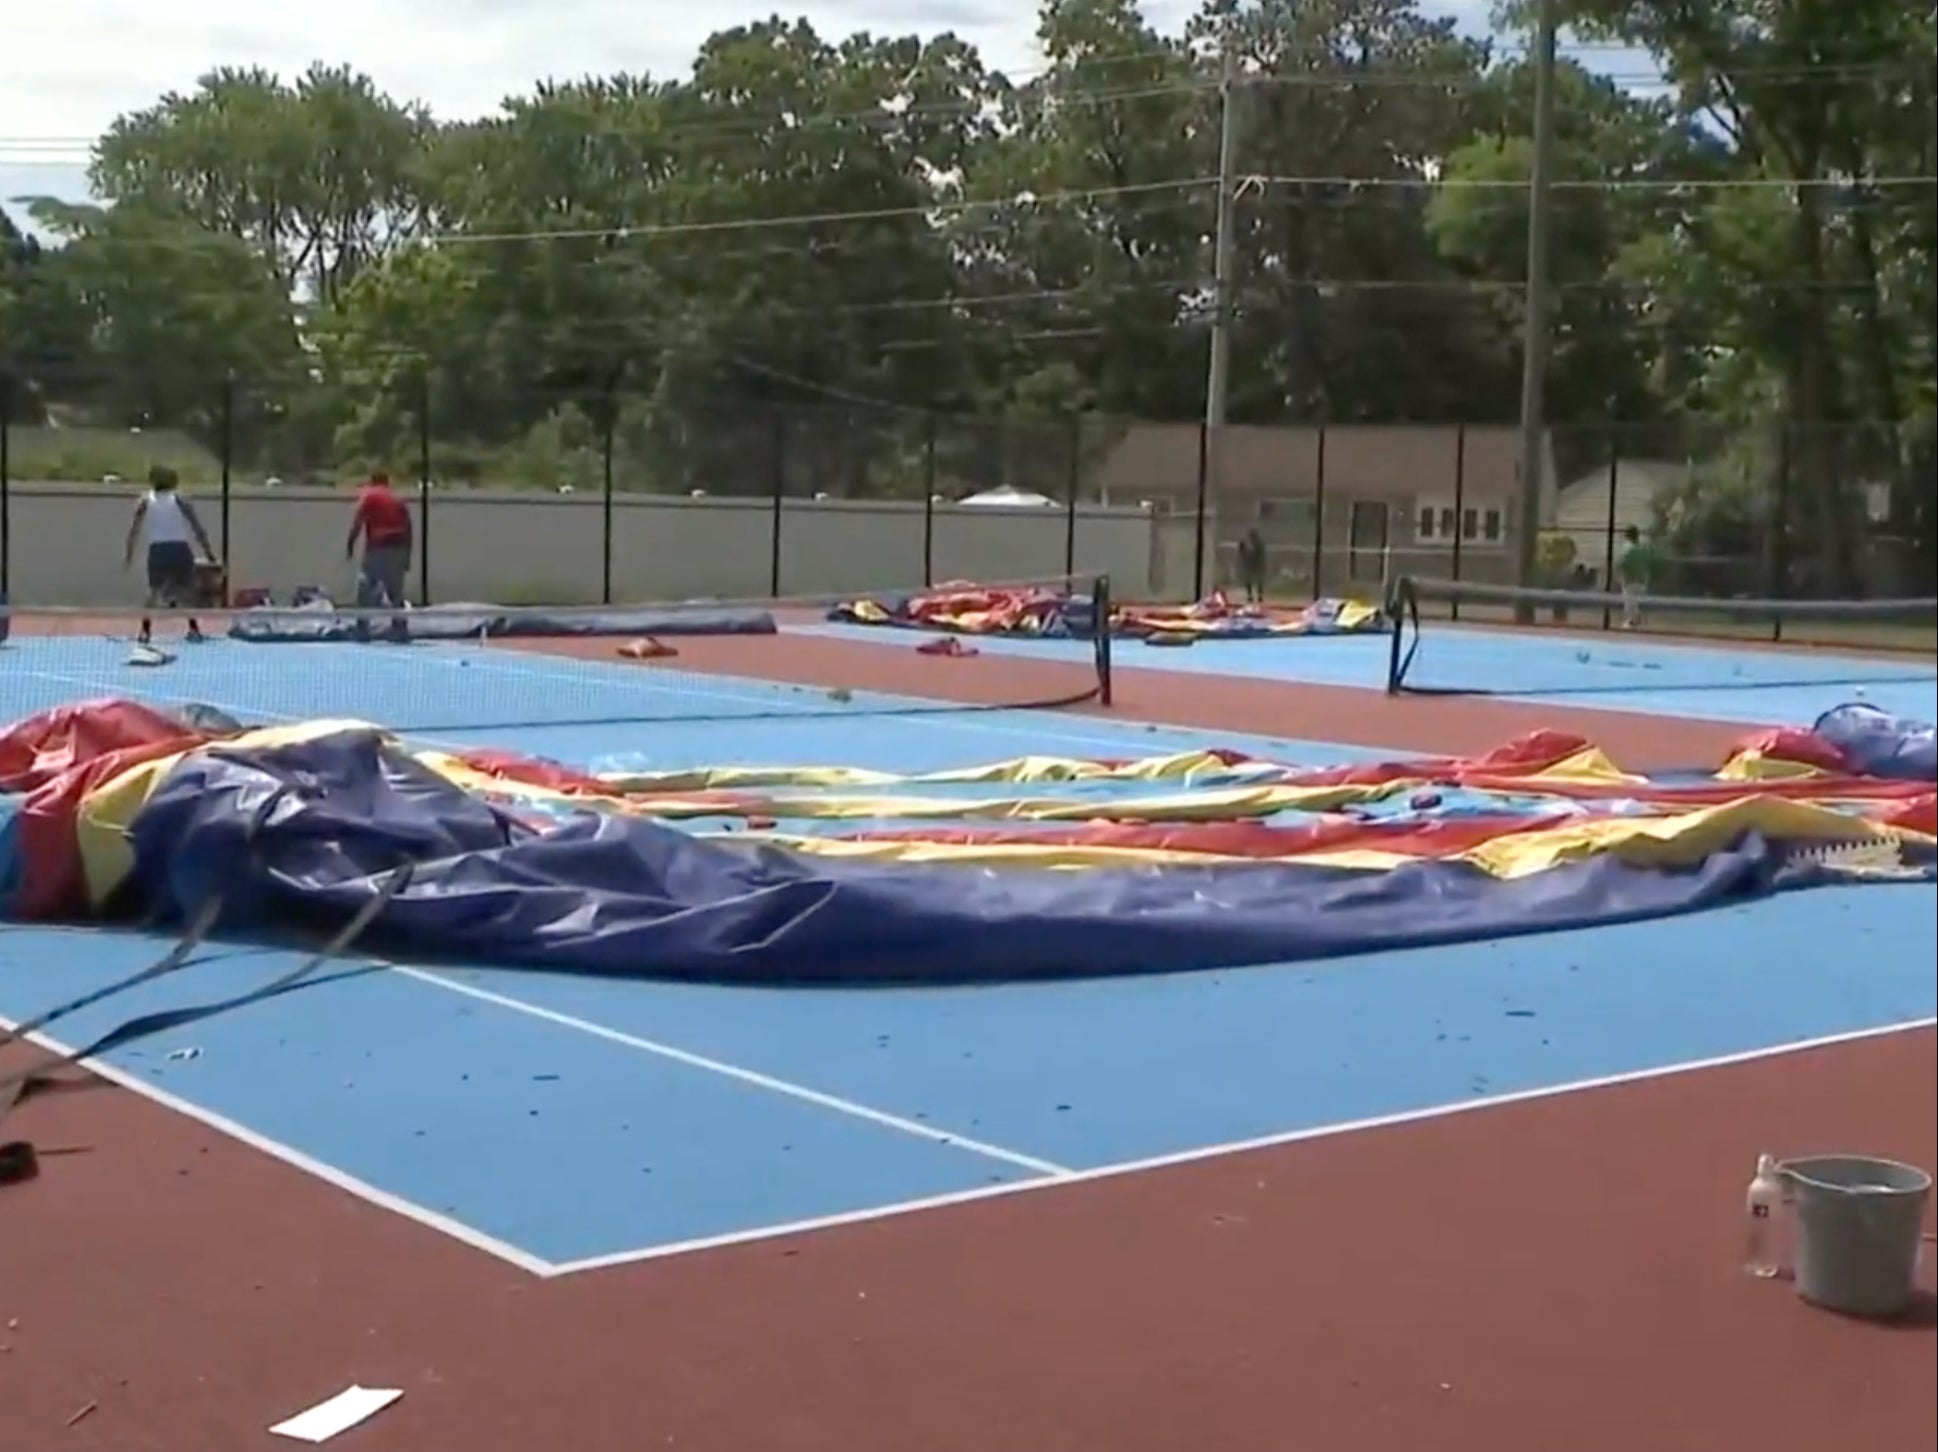 The inflatable slide collapsed during an end of school year event